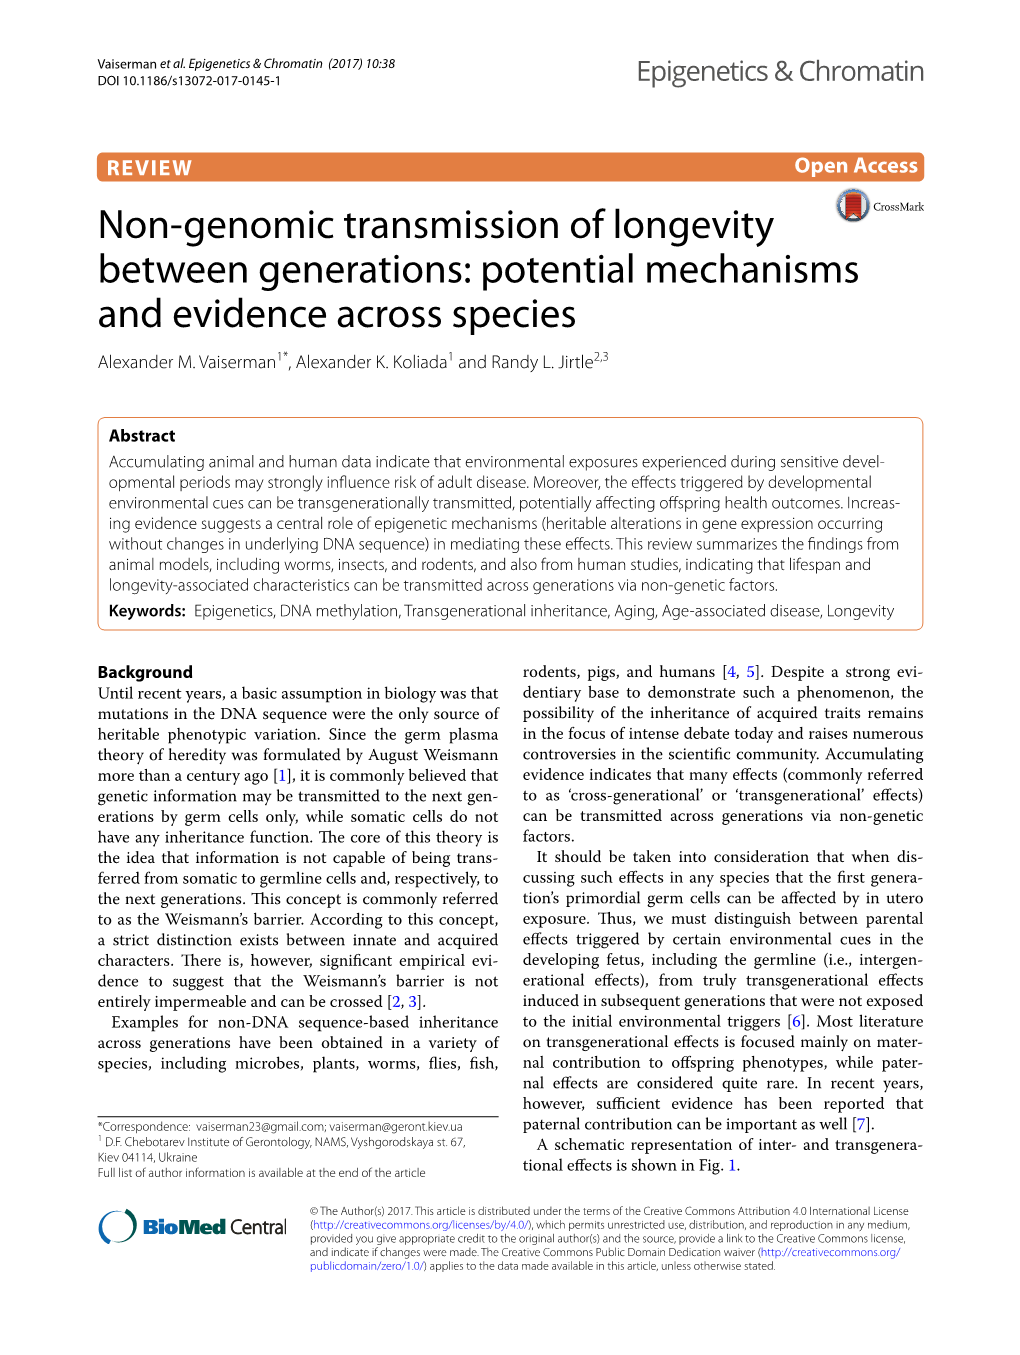 Non-Genomic Transmission of Longevity Between Generations: Potential Mechanisms and Evidence Across Species